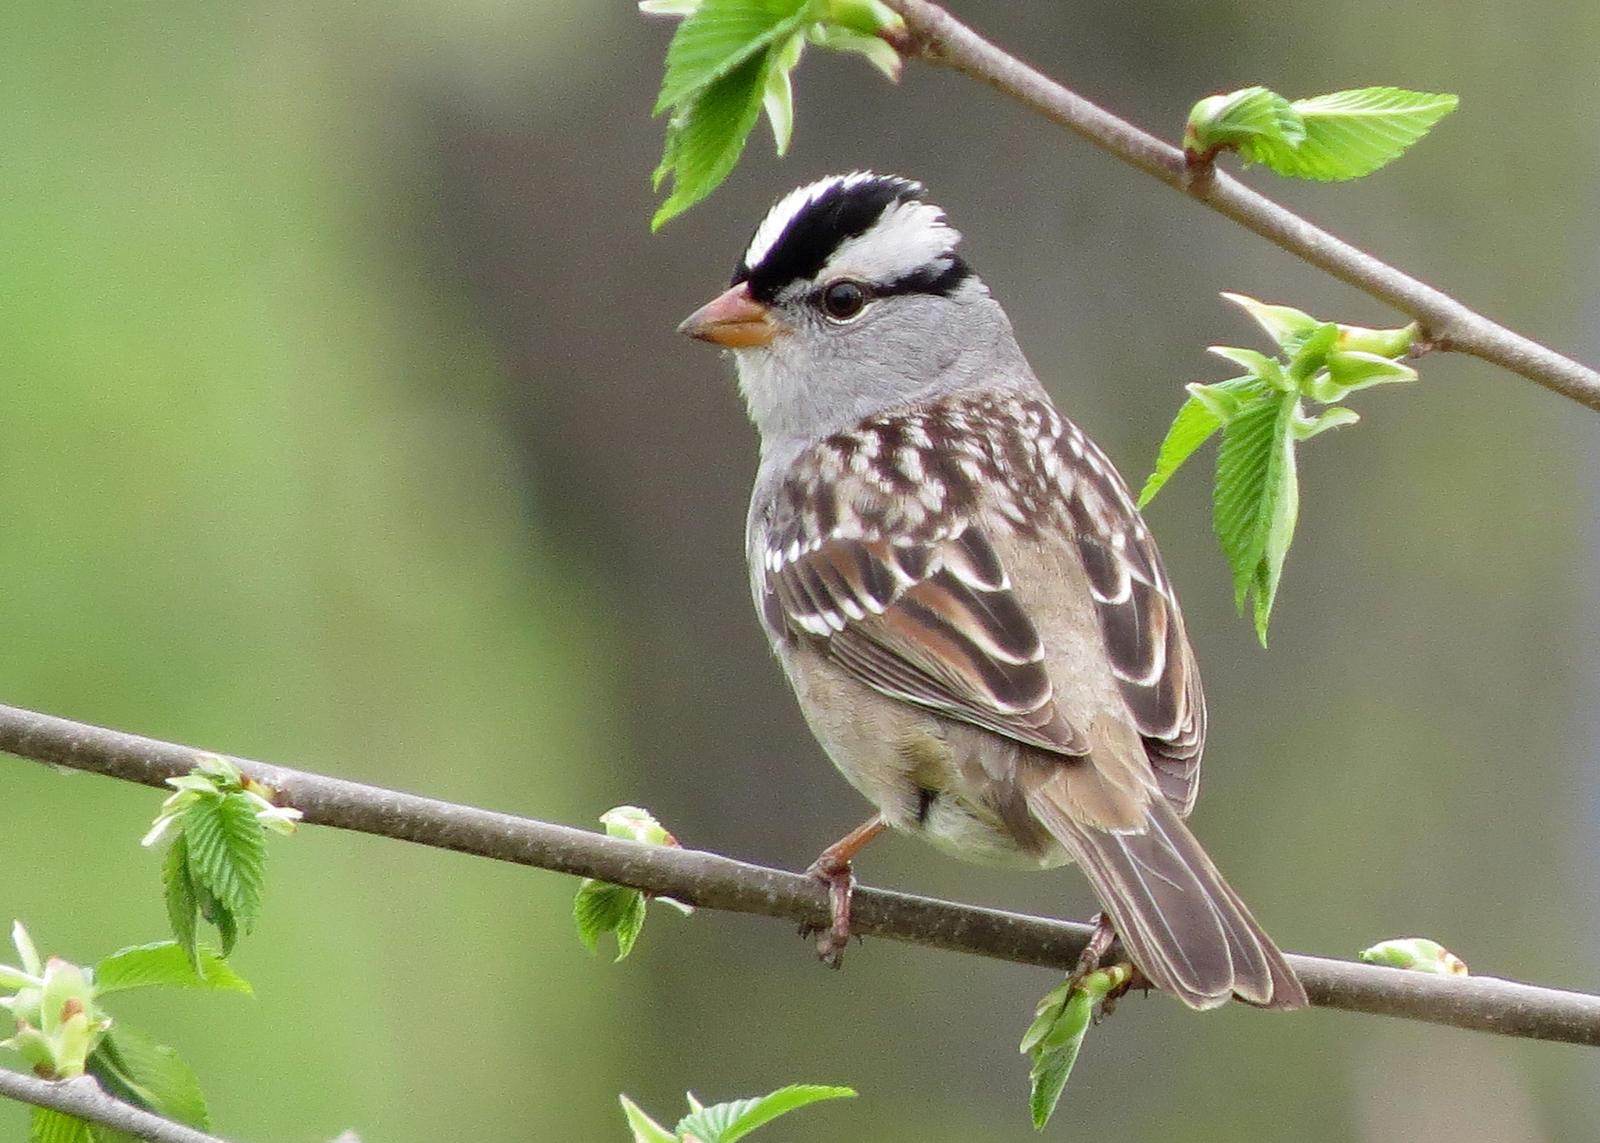 White-crowned Sparrow Photo by Kelly Preheim